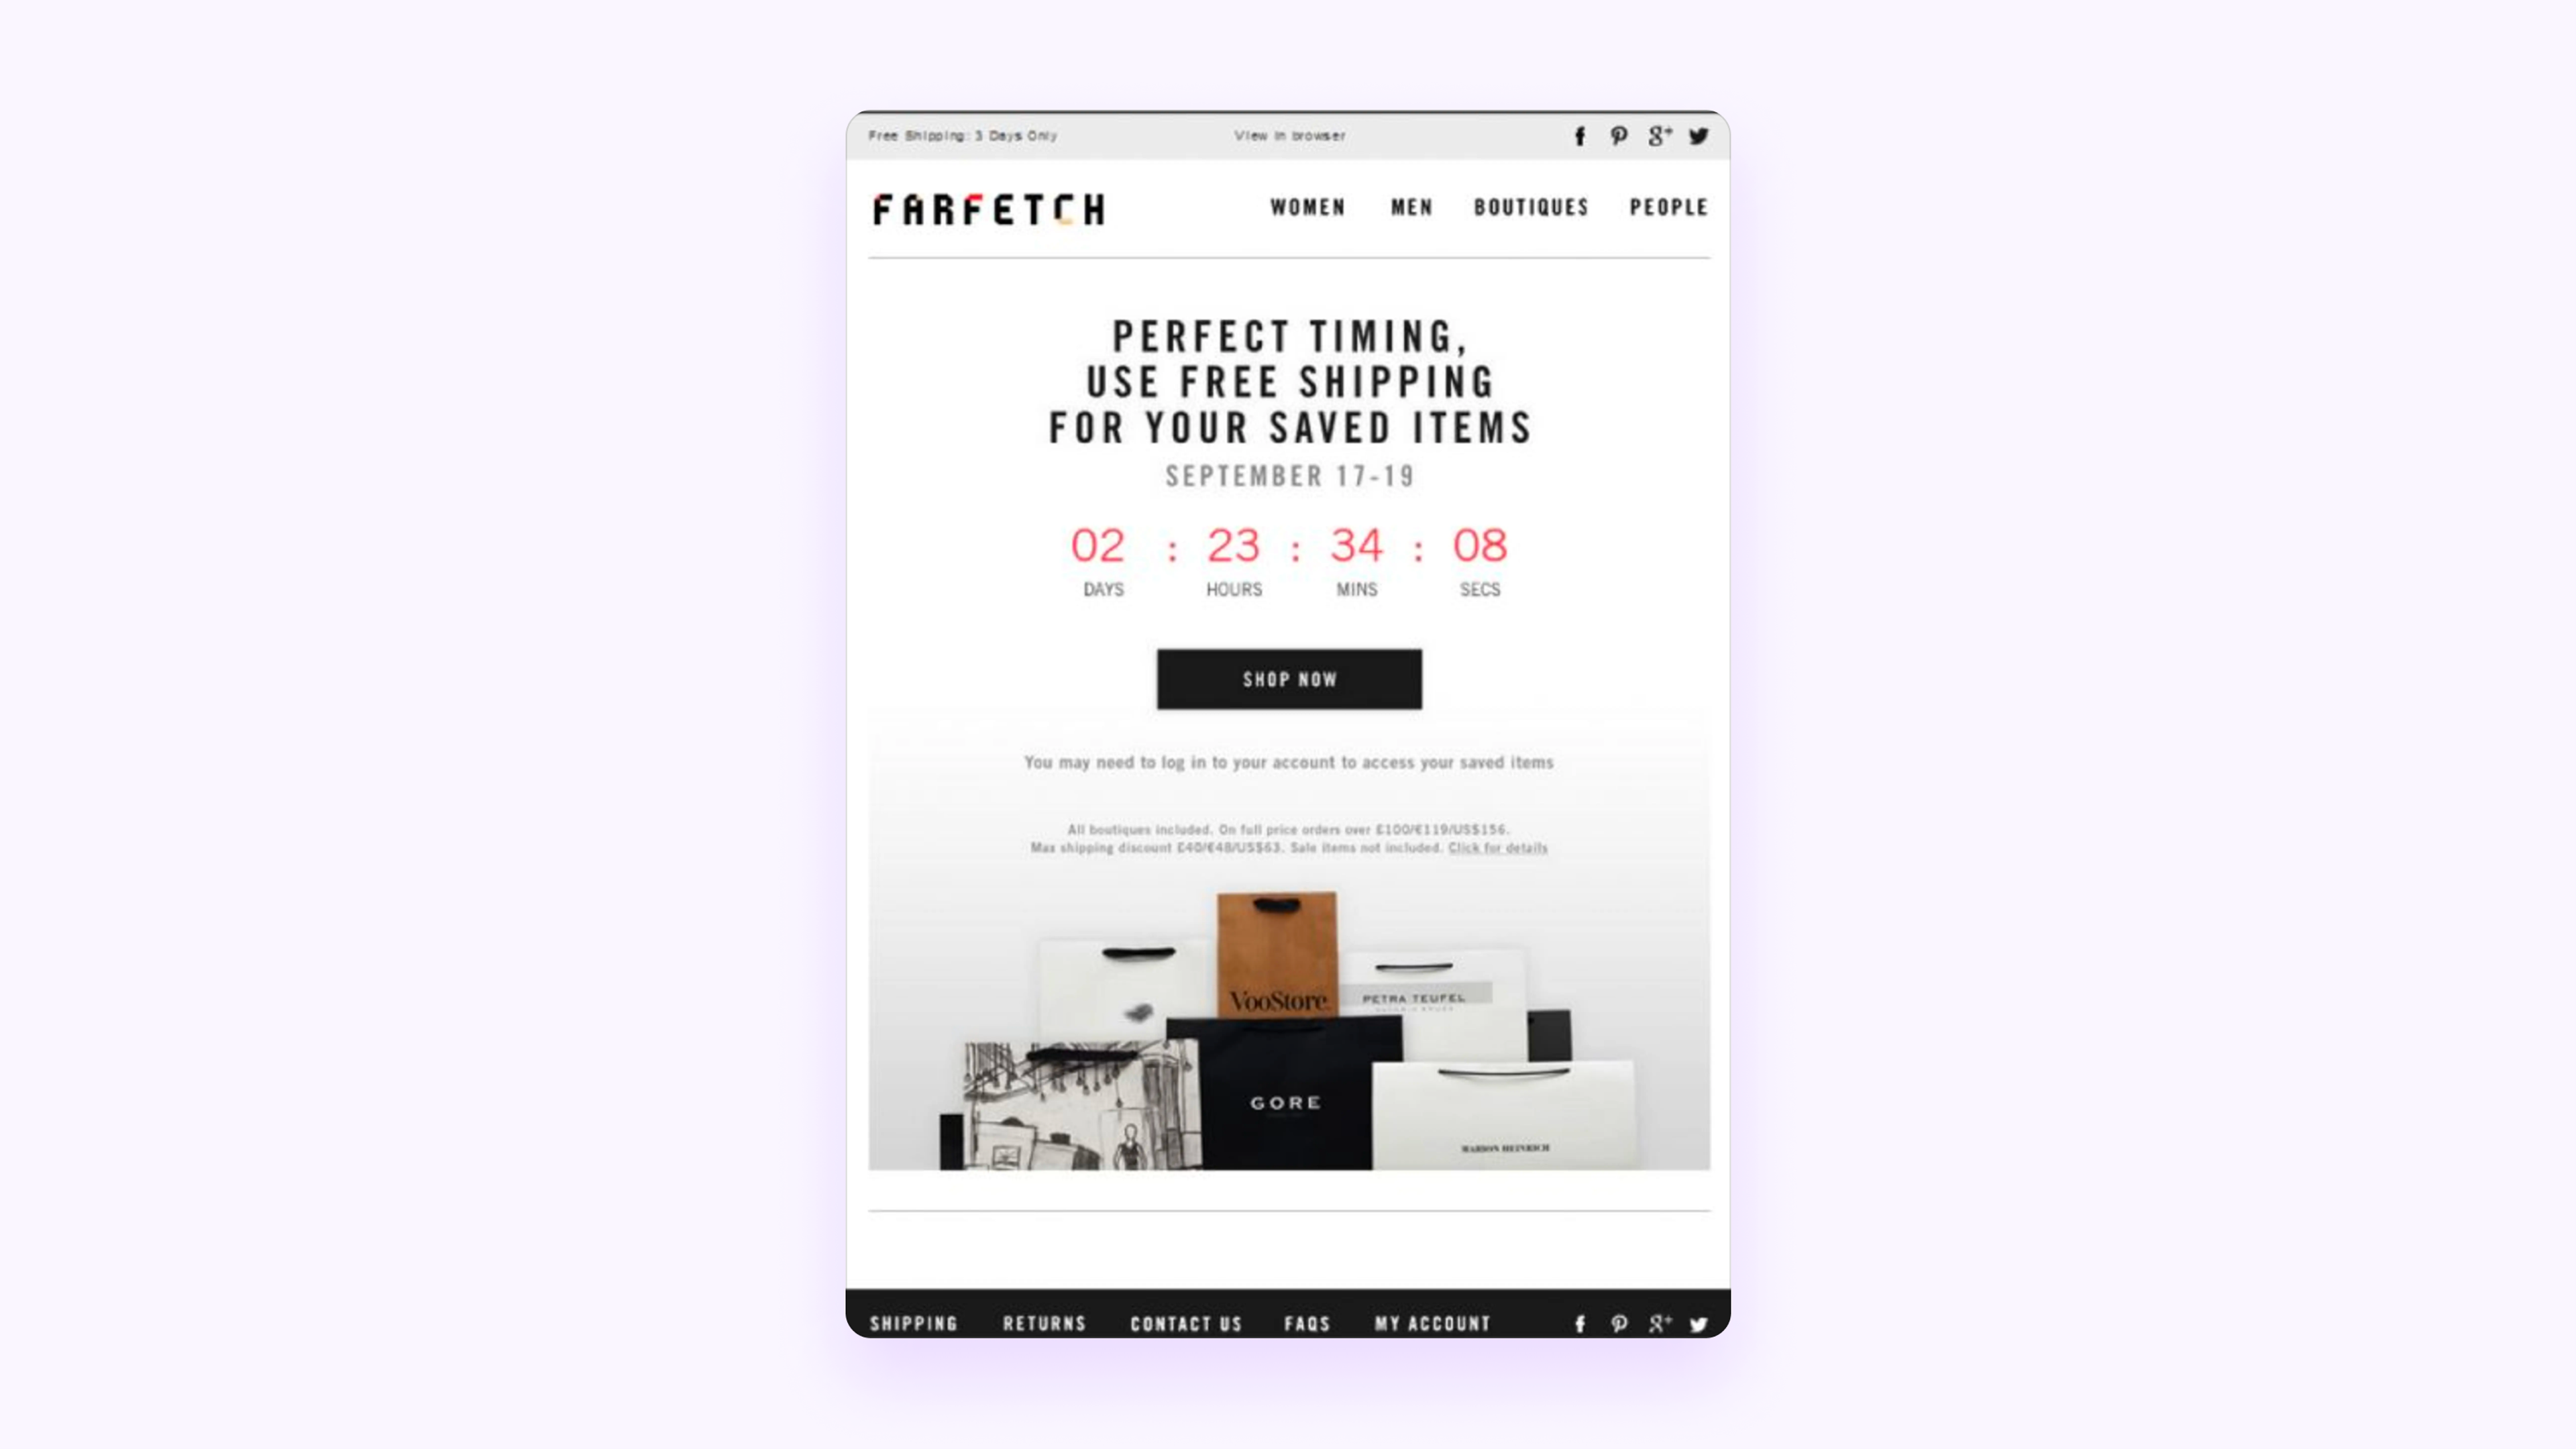 Image depicts a countdown timer from retailer Farfetch